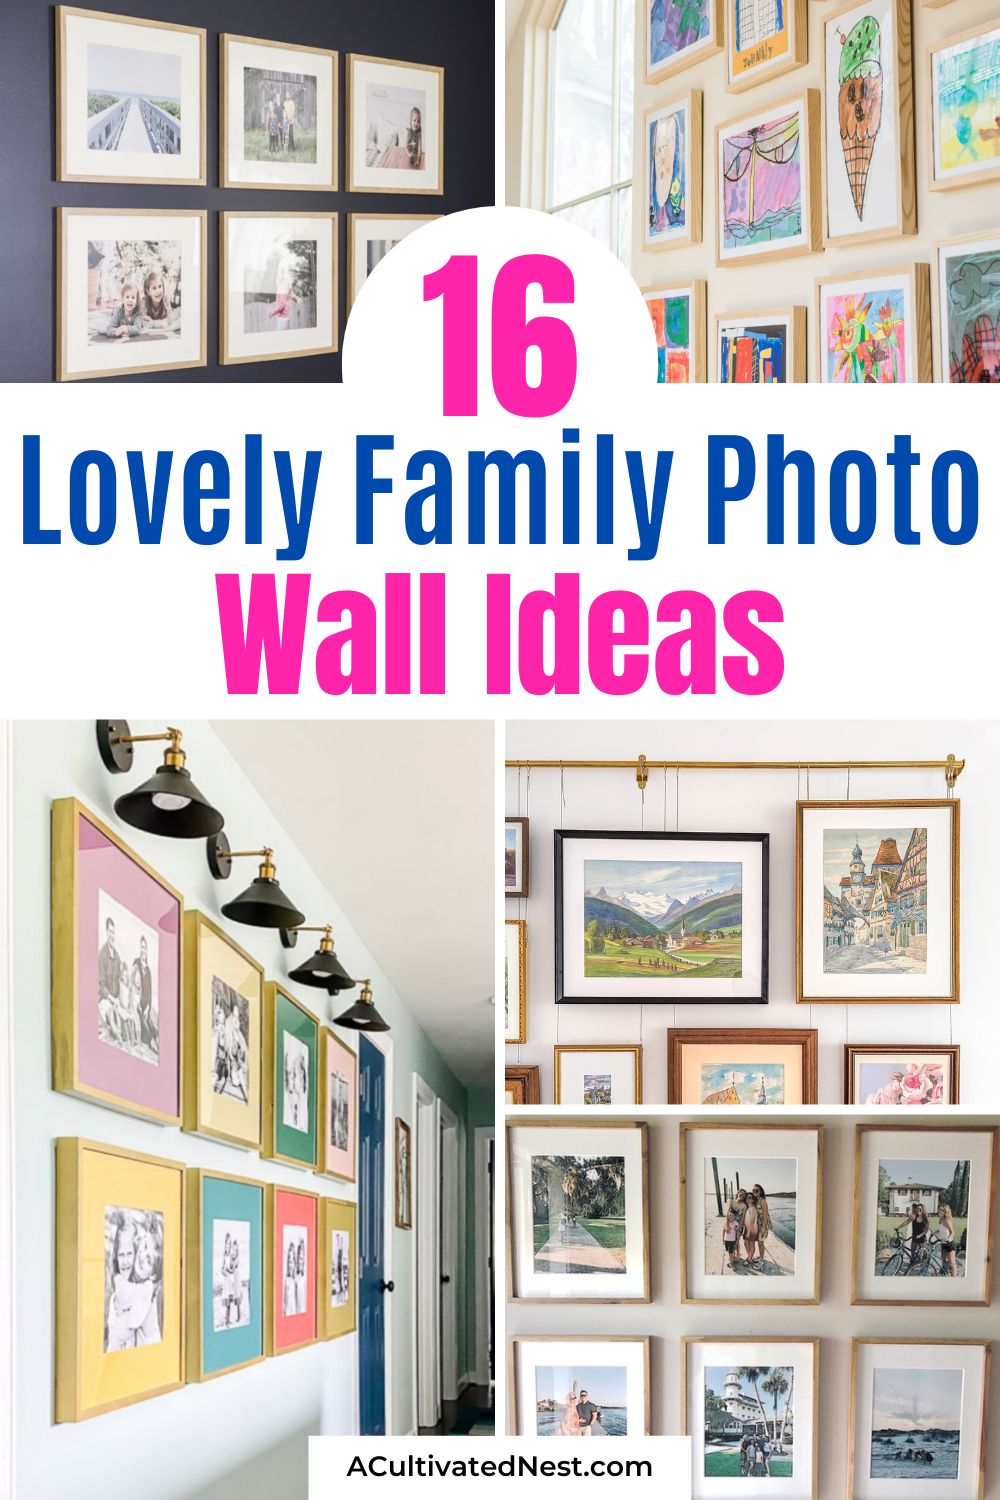 16 Lovely Family Photo Wall Ideas- Bring your walls to life with our heartwarming family photo wall ideas! Whether it’s an elegant gallery wall or quirky frames, each layout offers a beautiful way to relive your best moments every day. | #familyPhotos #WallDecor #photoDecor #decorating #ACultivatedNest